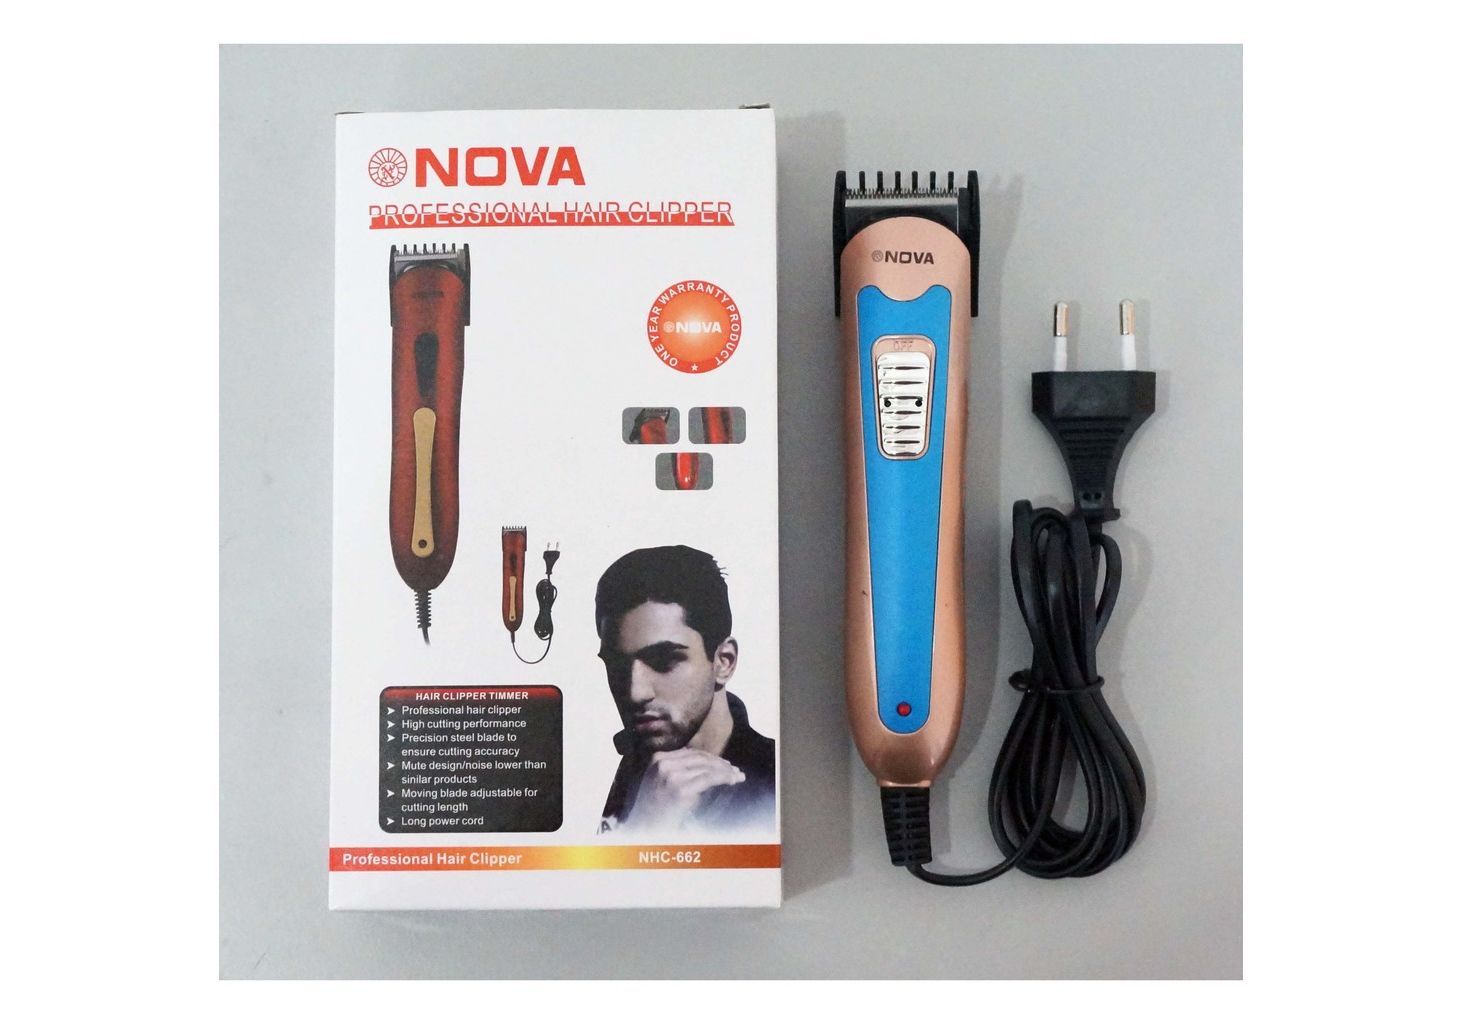 Catalog :: Health & Beauty :: MEN'S GROOMING :: Nova Professional Hair  Clipper NHC-662 Timmer - SoBigDeal - The First Online Marketplace in the  Horn of Africa